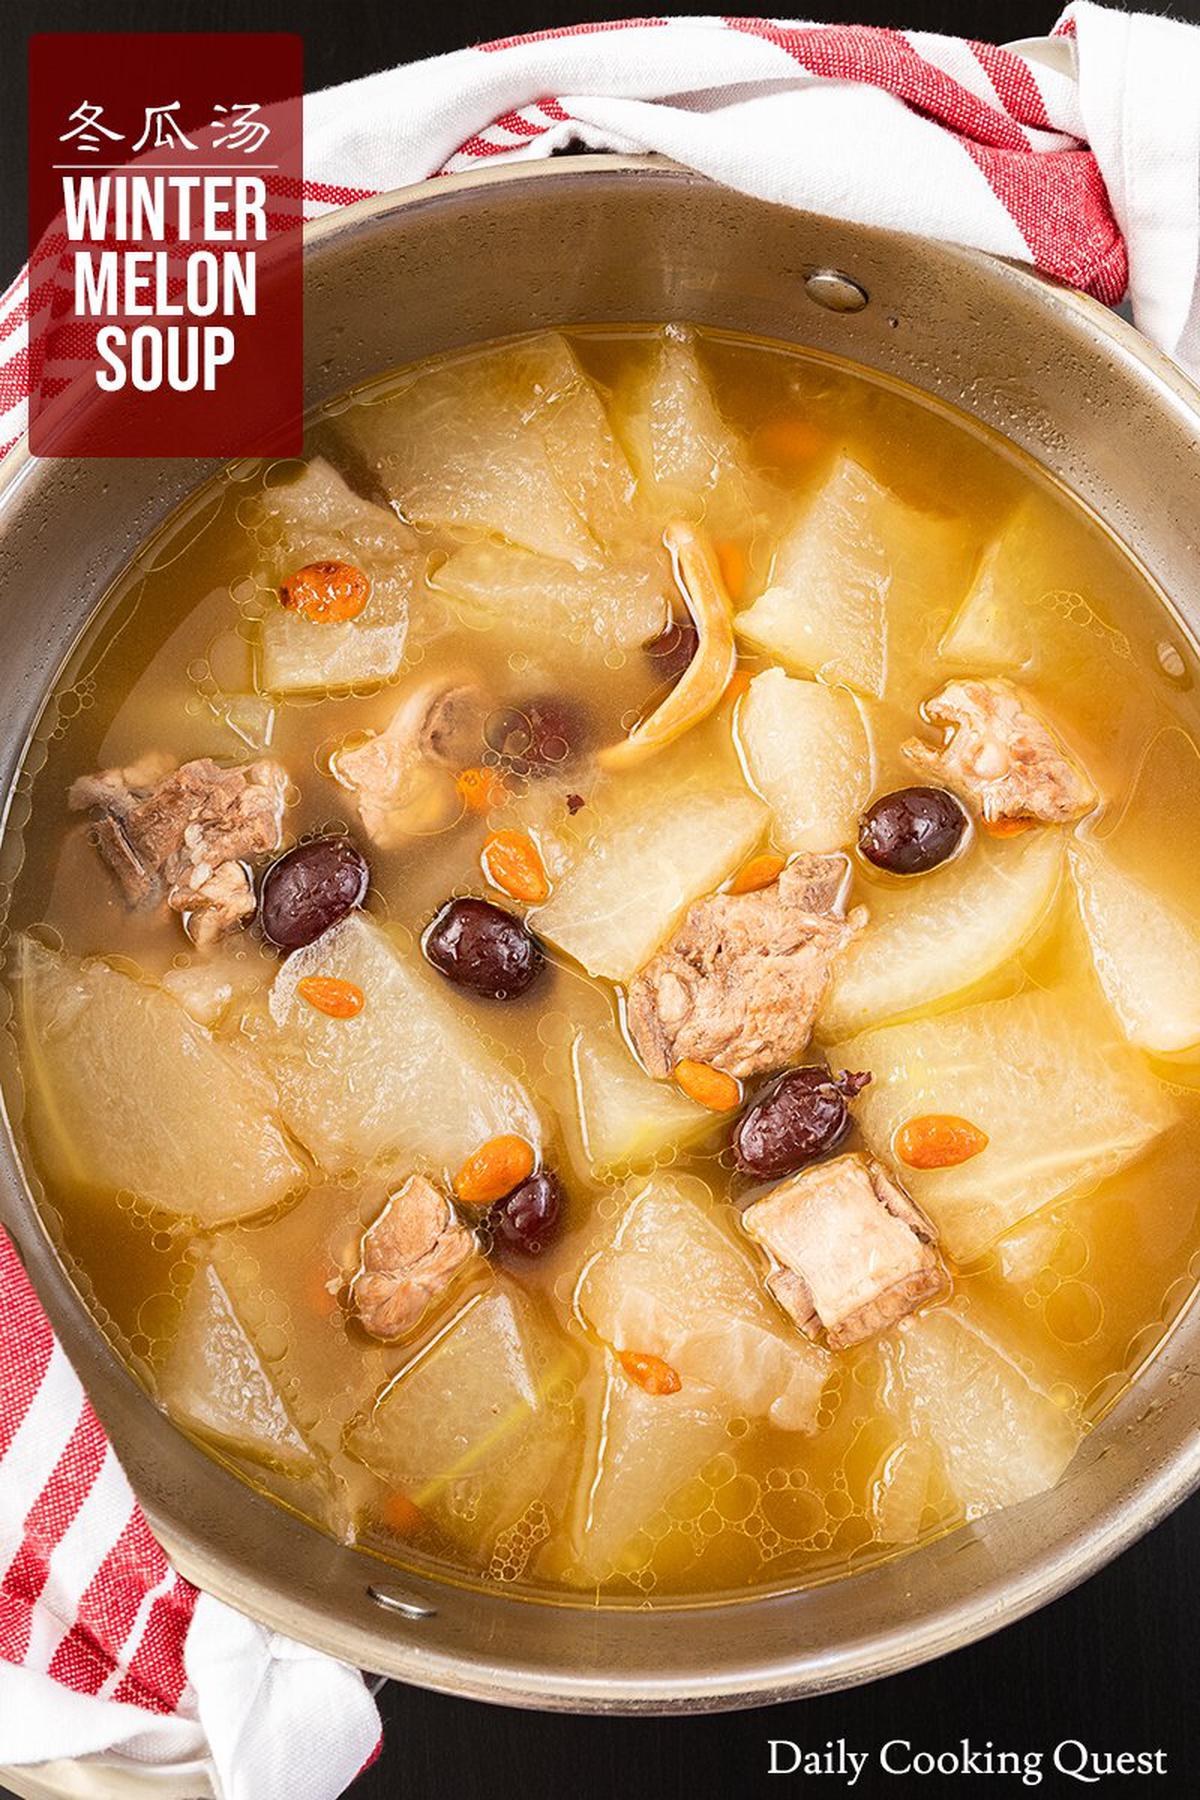 https://dailycookingquest.com/img/2019/10/winter-melon-soup-4_hu27db43c55220b53b3c9973c64f63db13_253442_1200x1800_resize_q75_lanczos.jpg